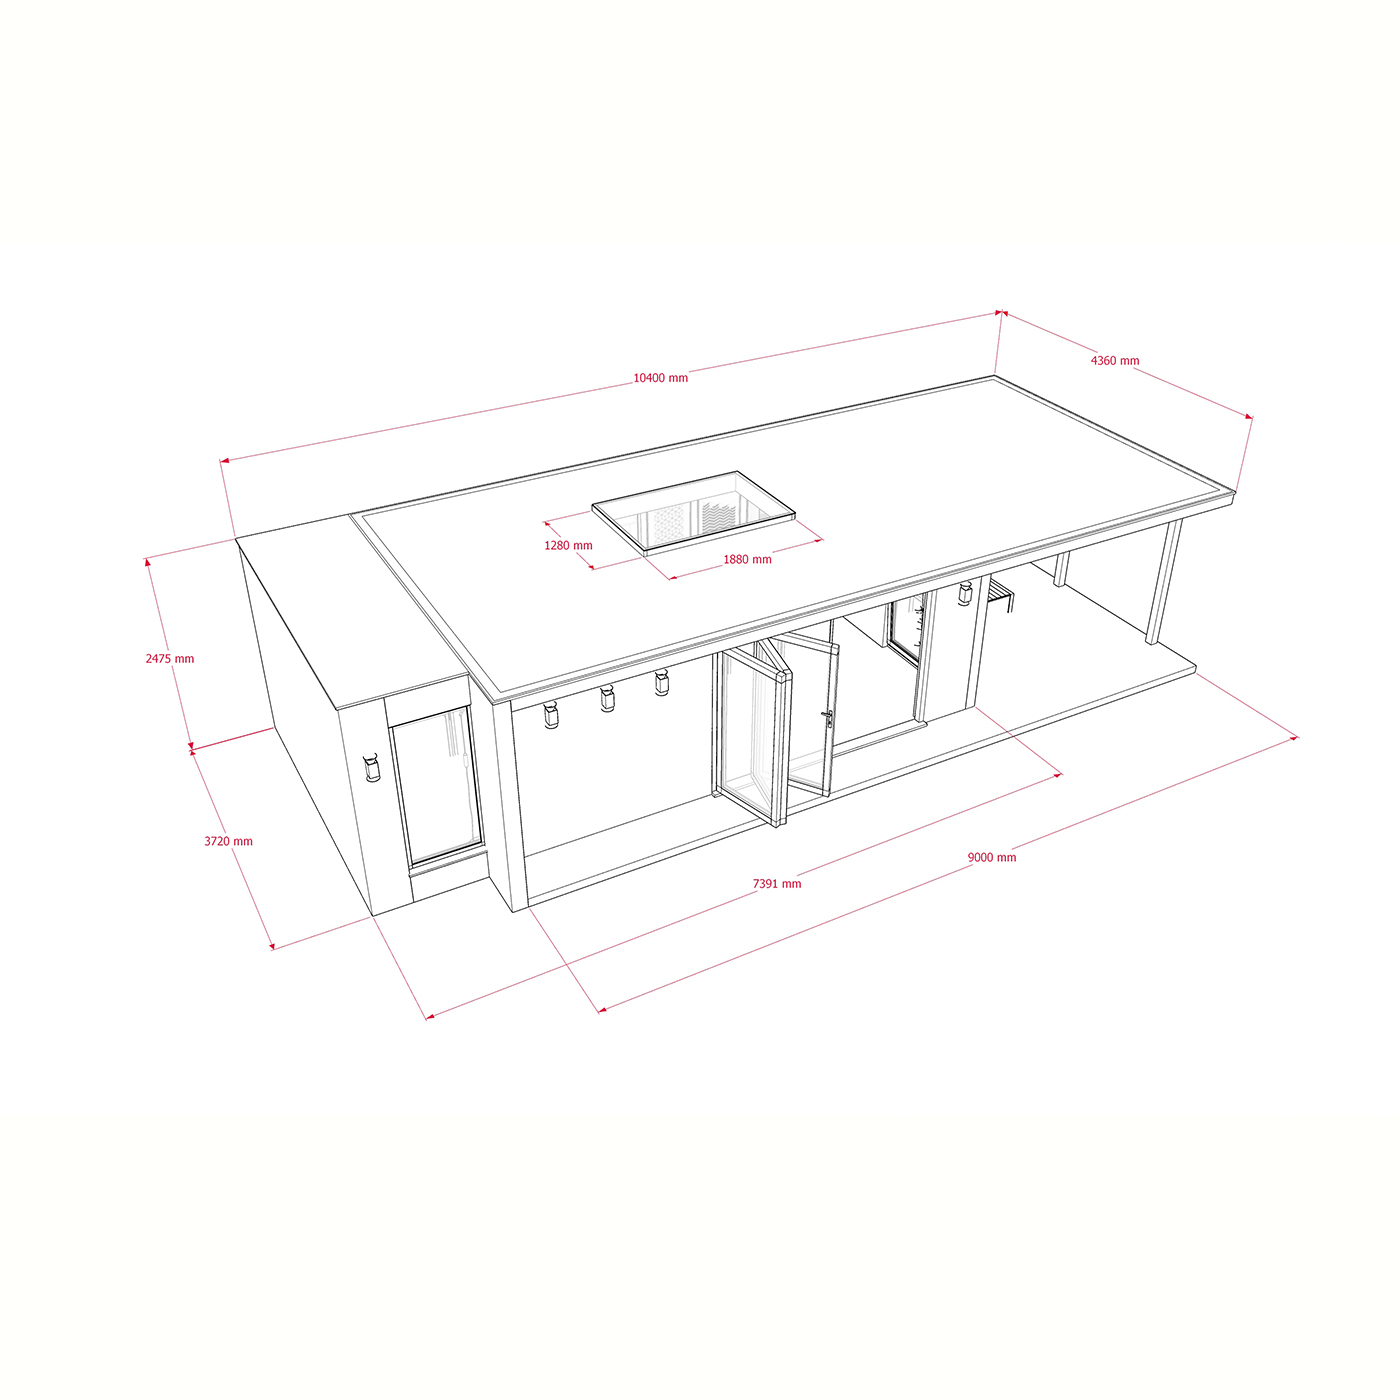 Exterior dimensions for 3.6m by 7.4m garden room